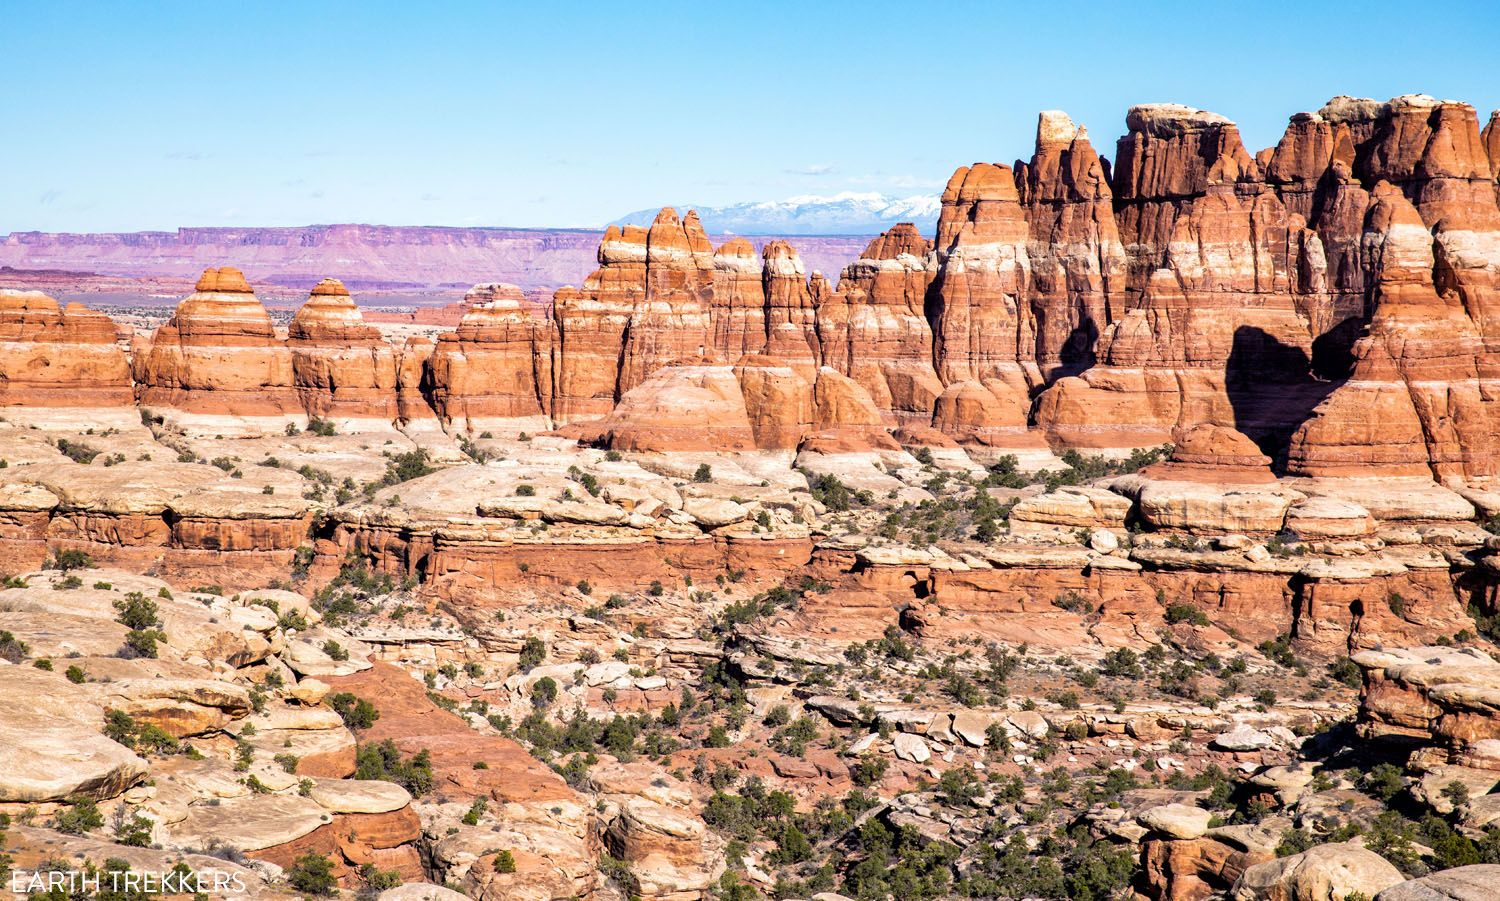 The Needles Canyonlands NP